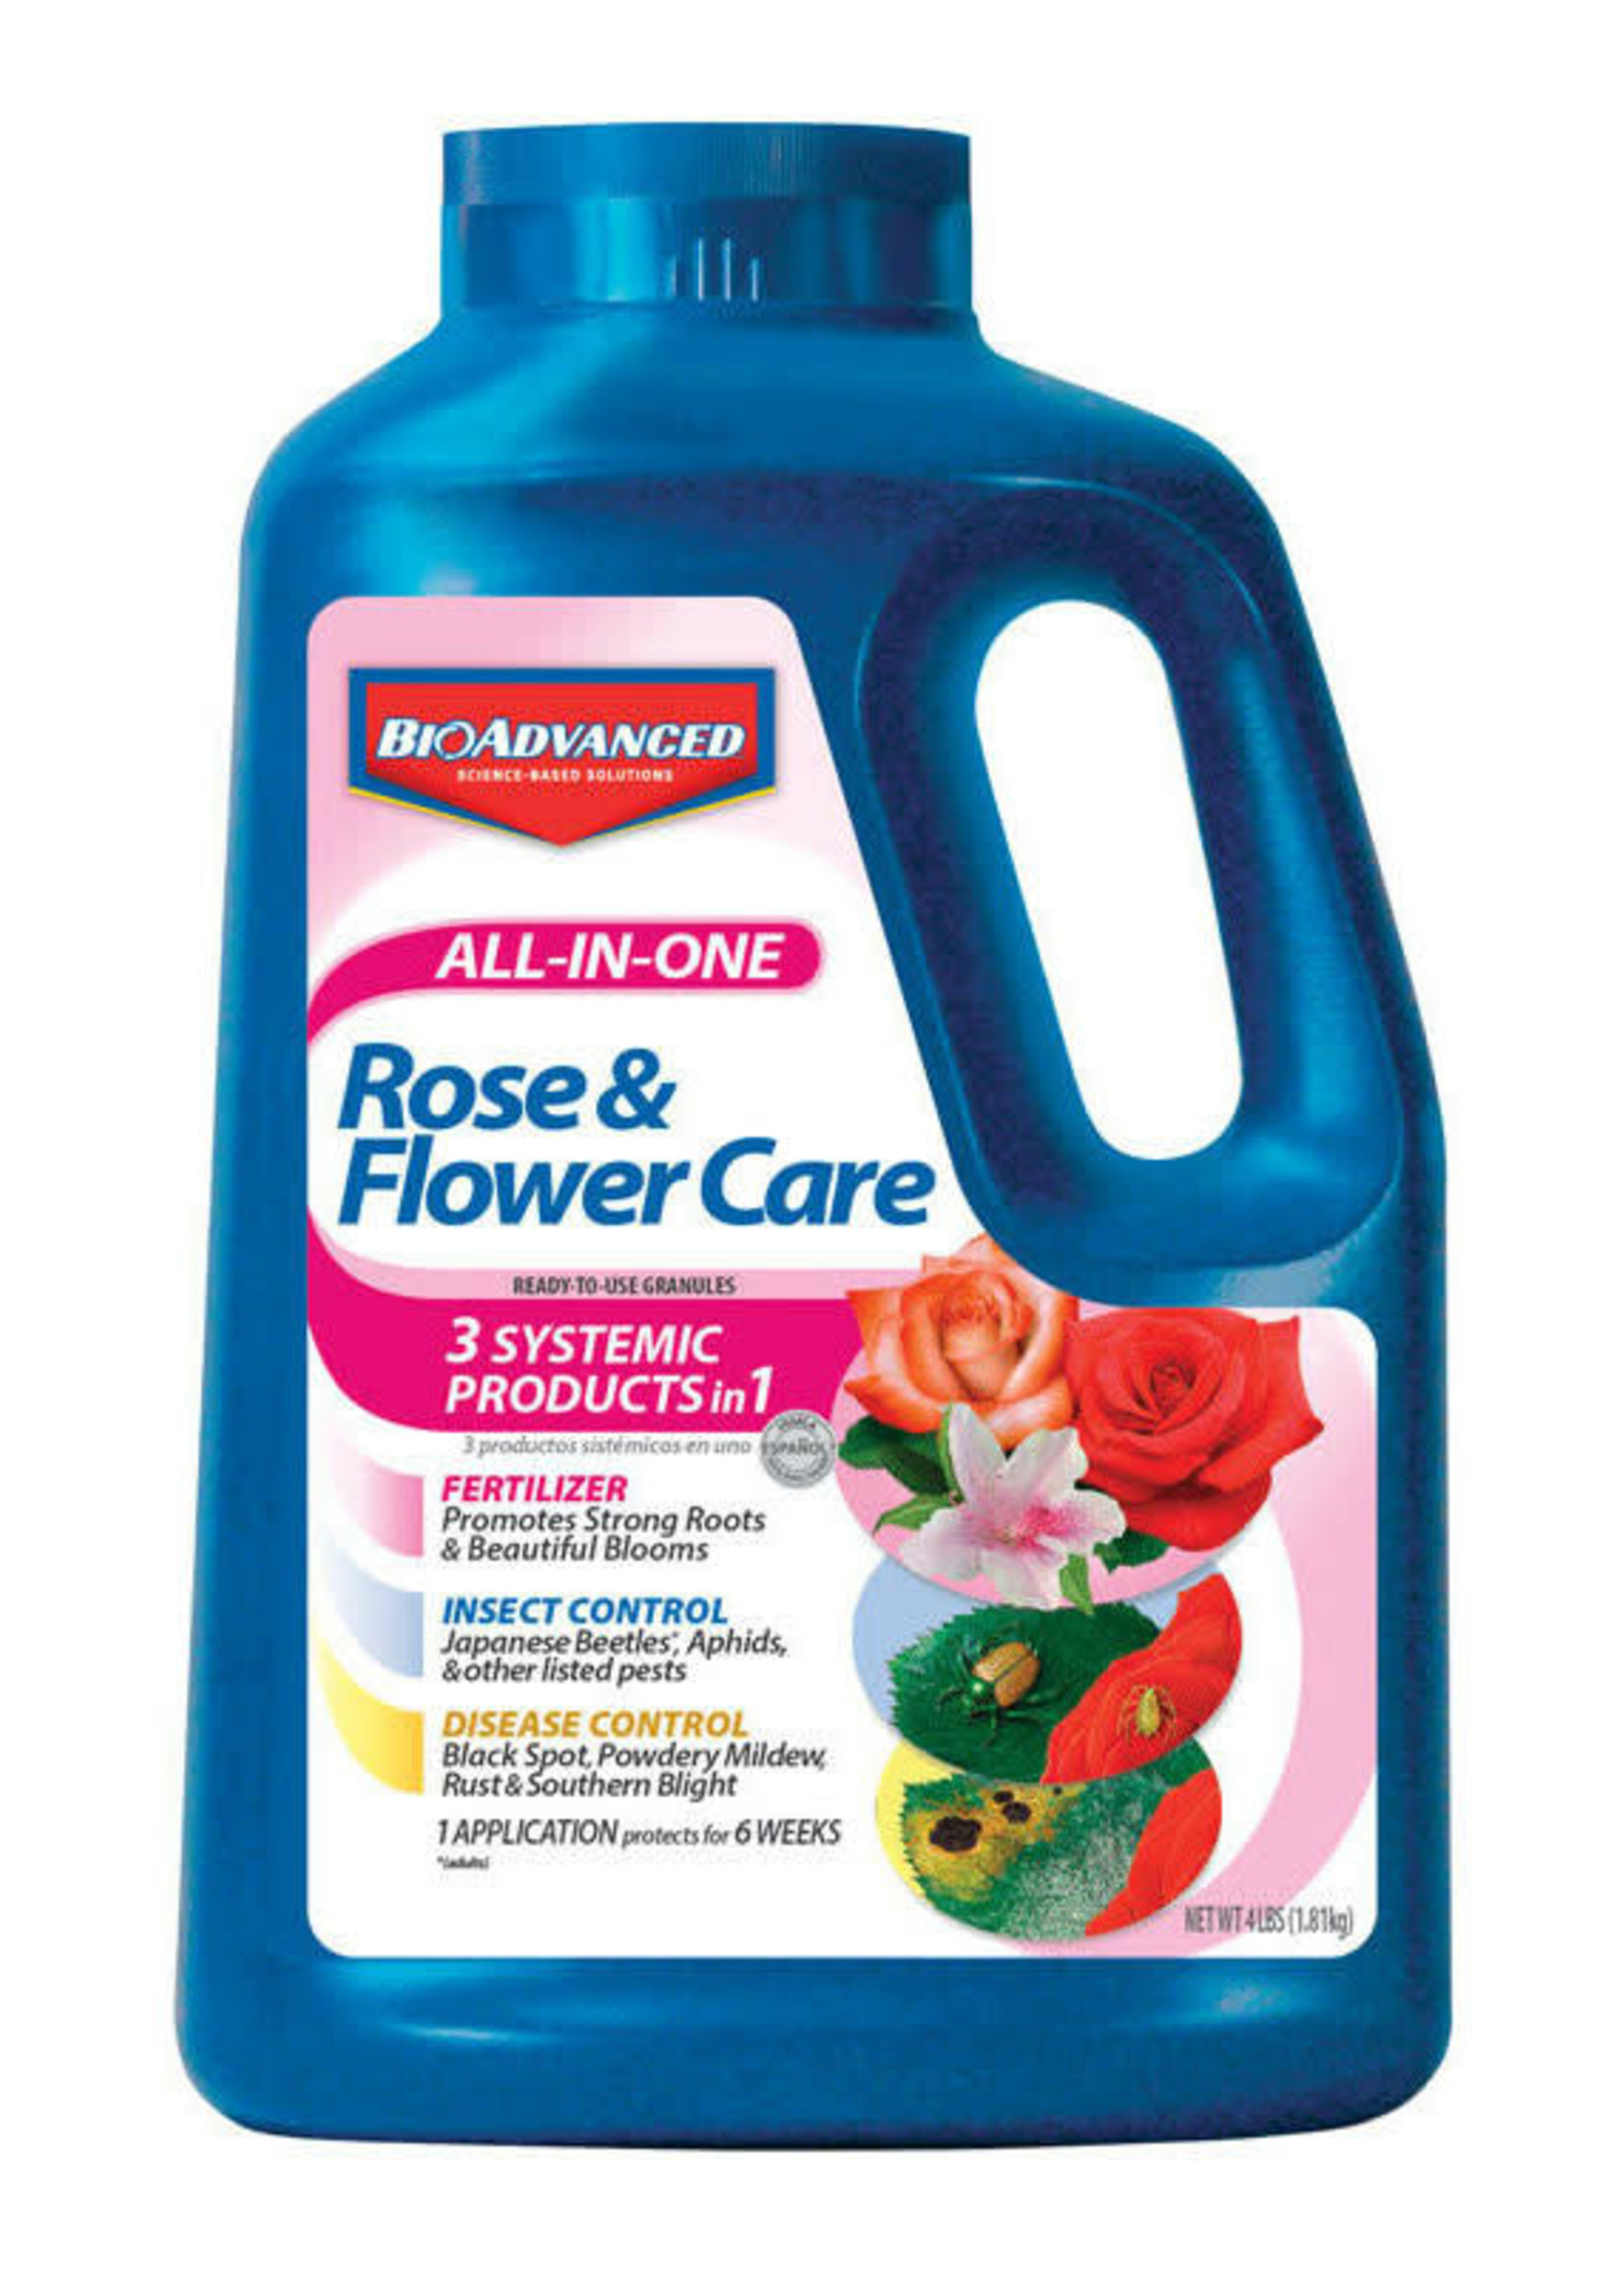 BioAdvanced All-in-One Rose & Flower Care 6-9-6 4lb